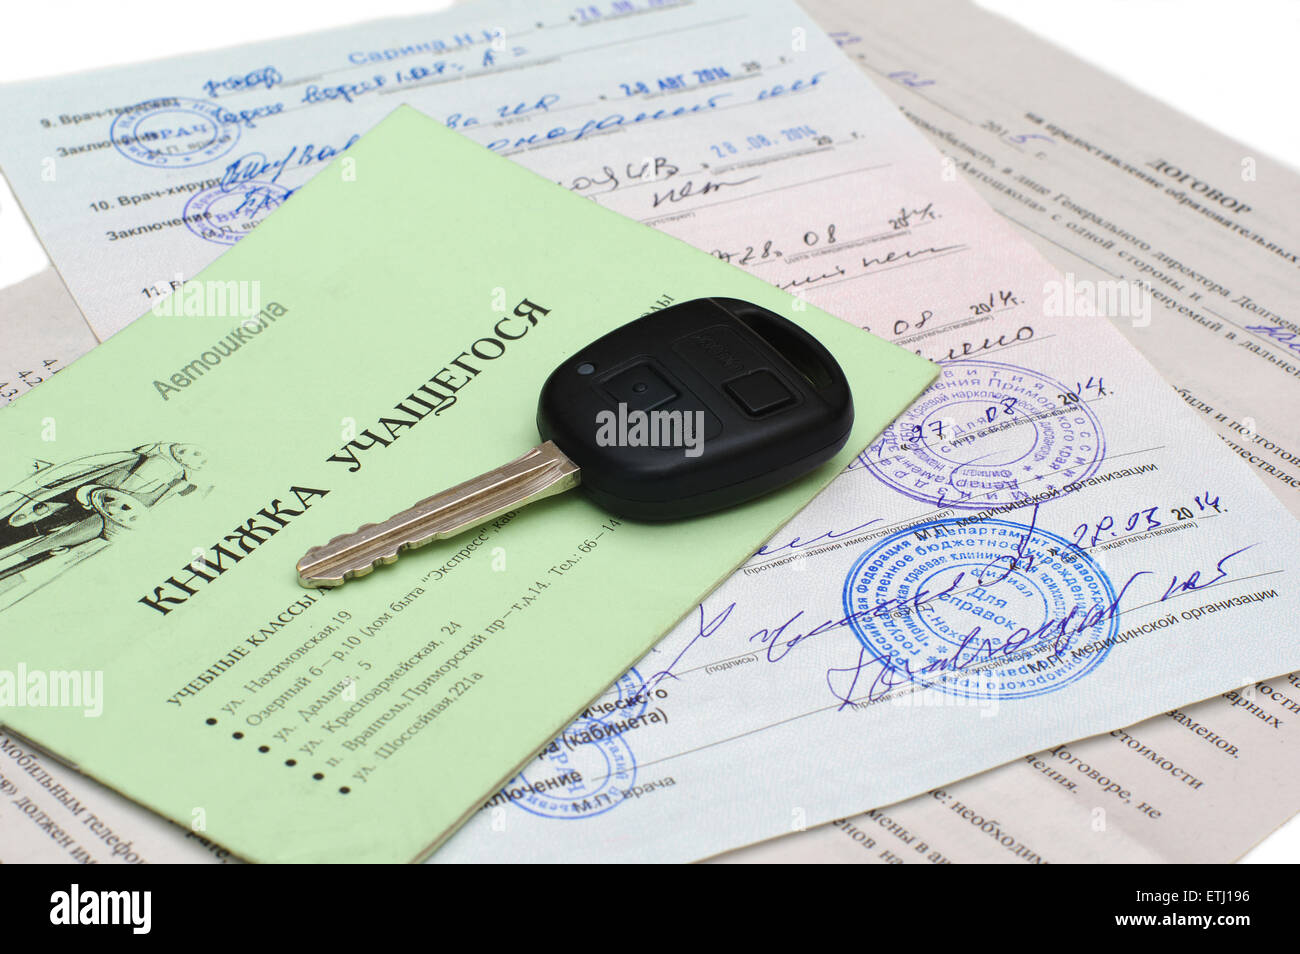 book learner driver courses, lies on the medical certificate and agreement on training in a driving school Russia Stock Photo